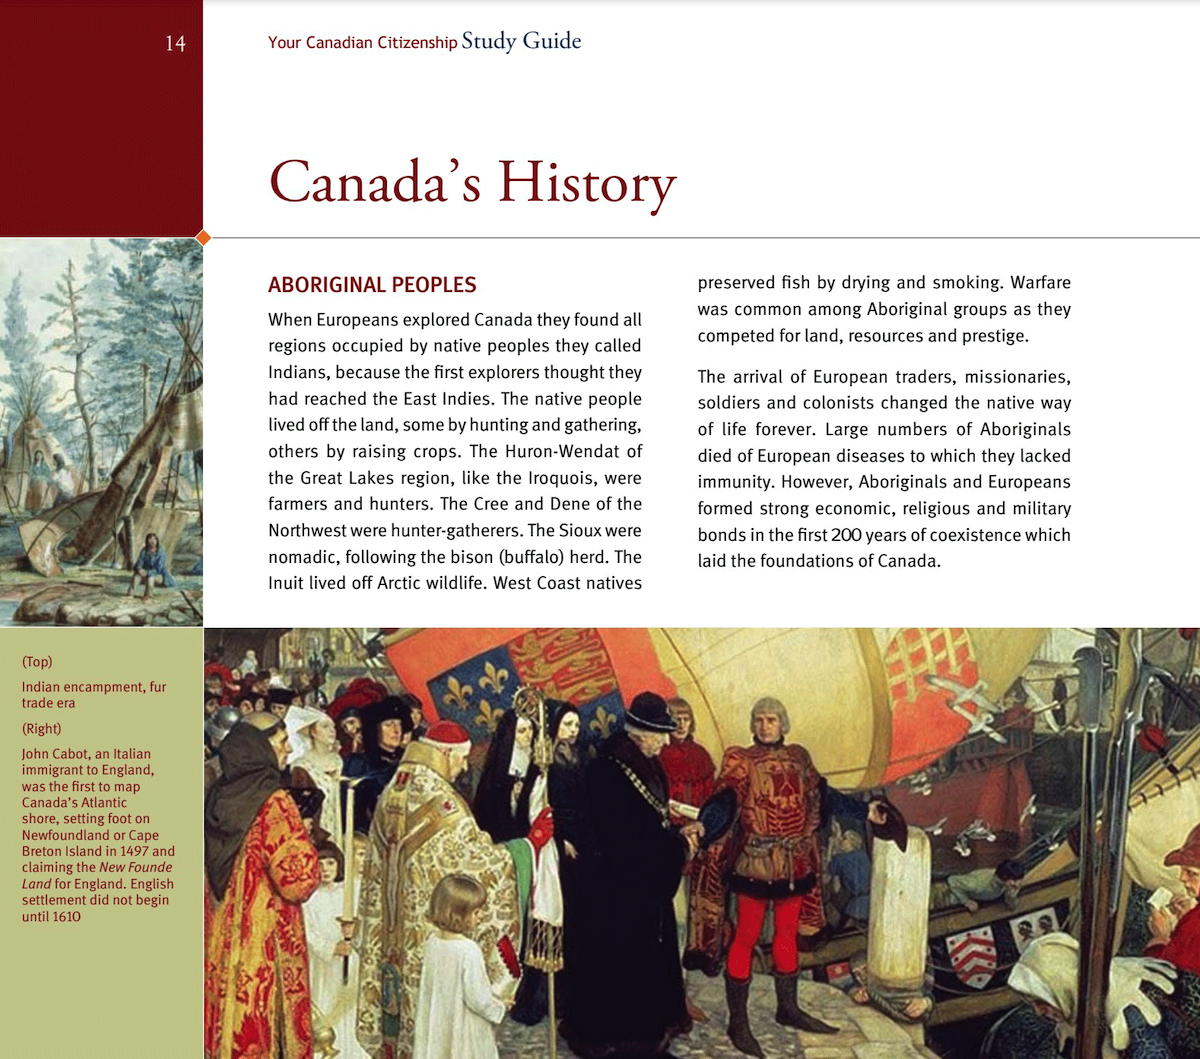 An excerpt from a study guide features a page titled “Canada’s History,” below which a subsection titled “Aboriginal peoples” depicts, on the left, a small illustration of a person seated near a teepee, and on the bottom, a large painting of early settlers in Canada.